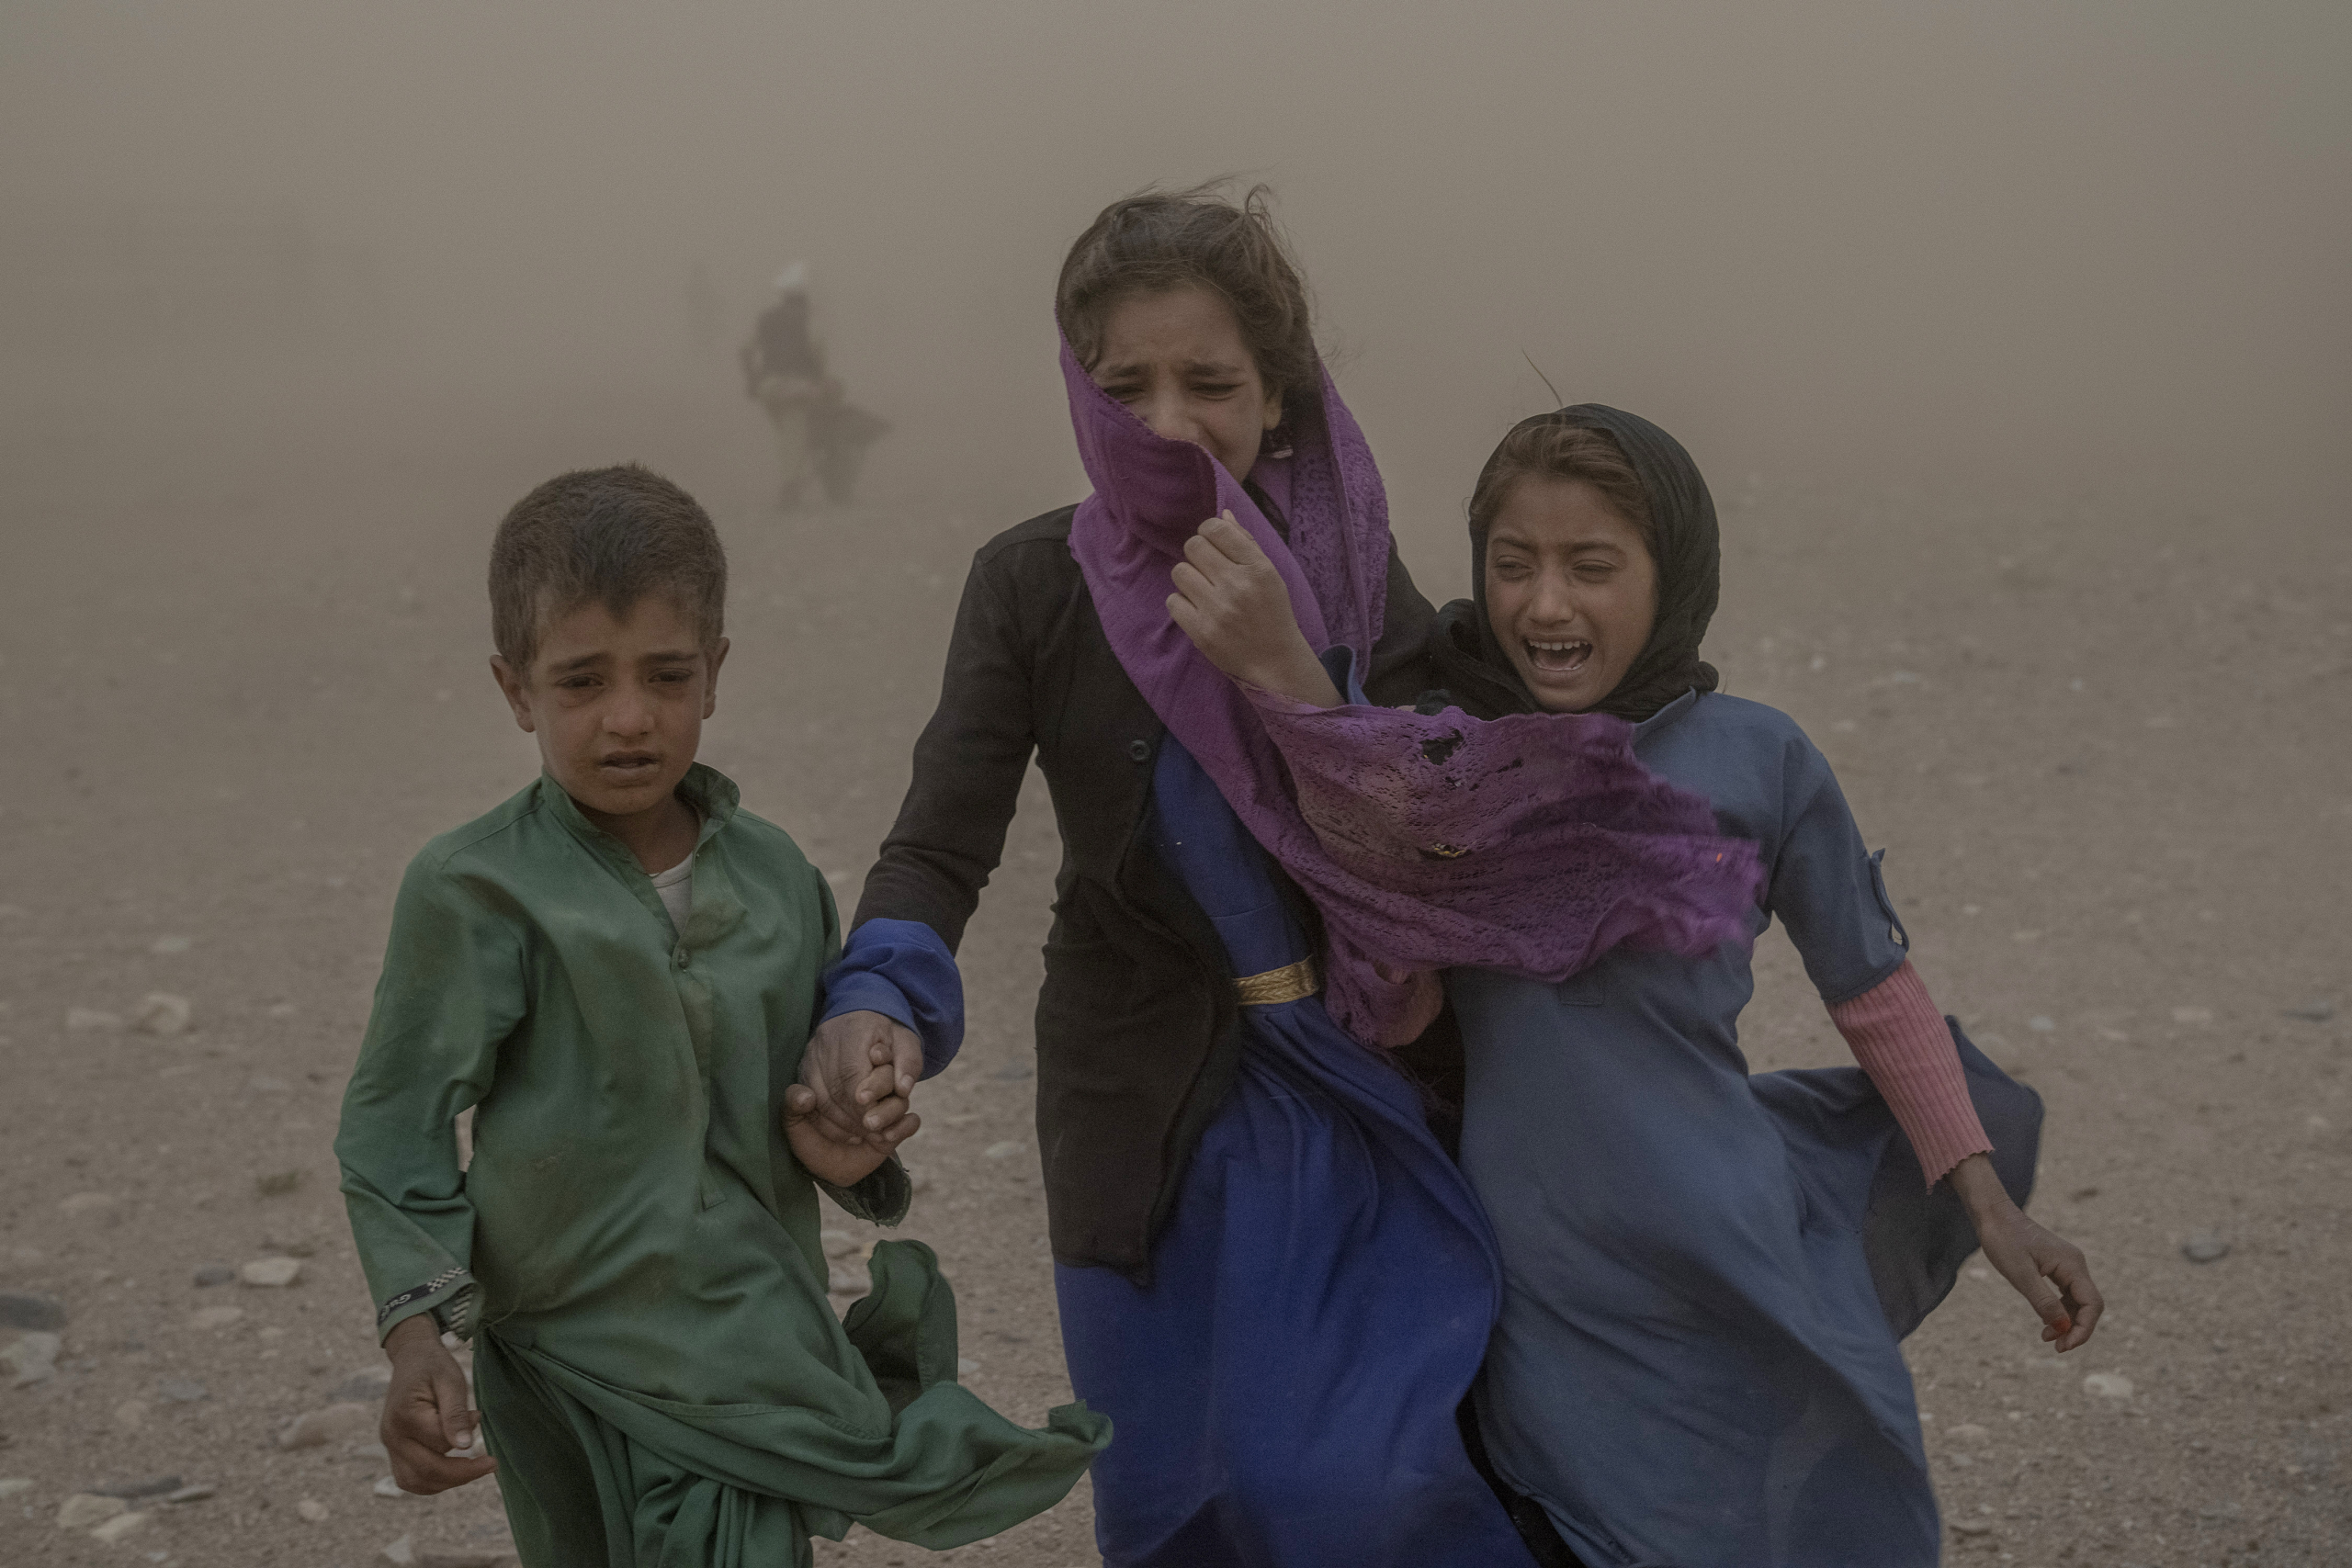 Afghan children carry donated aid to their tents, while they are scared and crying from the fierce sandstorm, after an earthquake in Zenda Jan district in Herat province, western of Afghanistan, Thursday, Oct. 12, 2023. Another strong earthquake shook western Afghanistan on Wednesday morning after an earlier one killed more than 2,000 people and flattened whole villages in Herat province in what was one of the most destructive quakes in the country's recent history. (AP Photo/Ebrahim Noroozi)

Associated Press/LaPresse
Only Italy and Spain